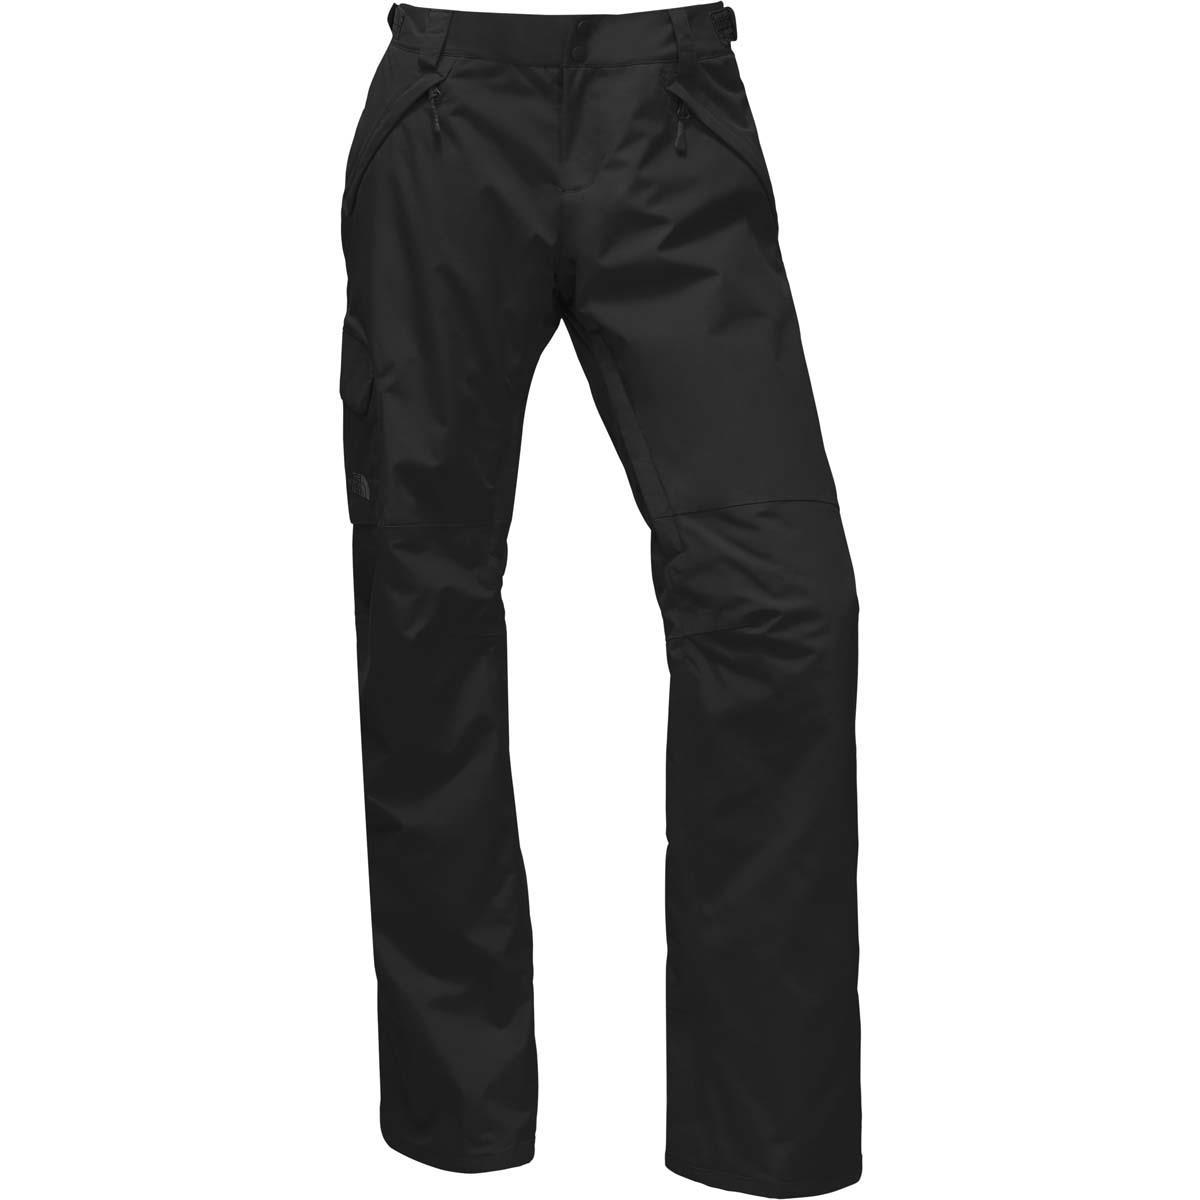 North Face Freedom LRBC Insulated Pant 